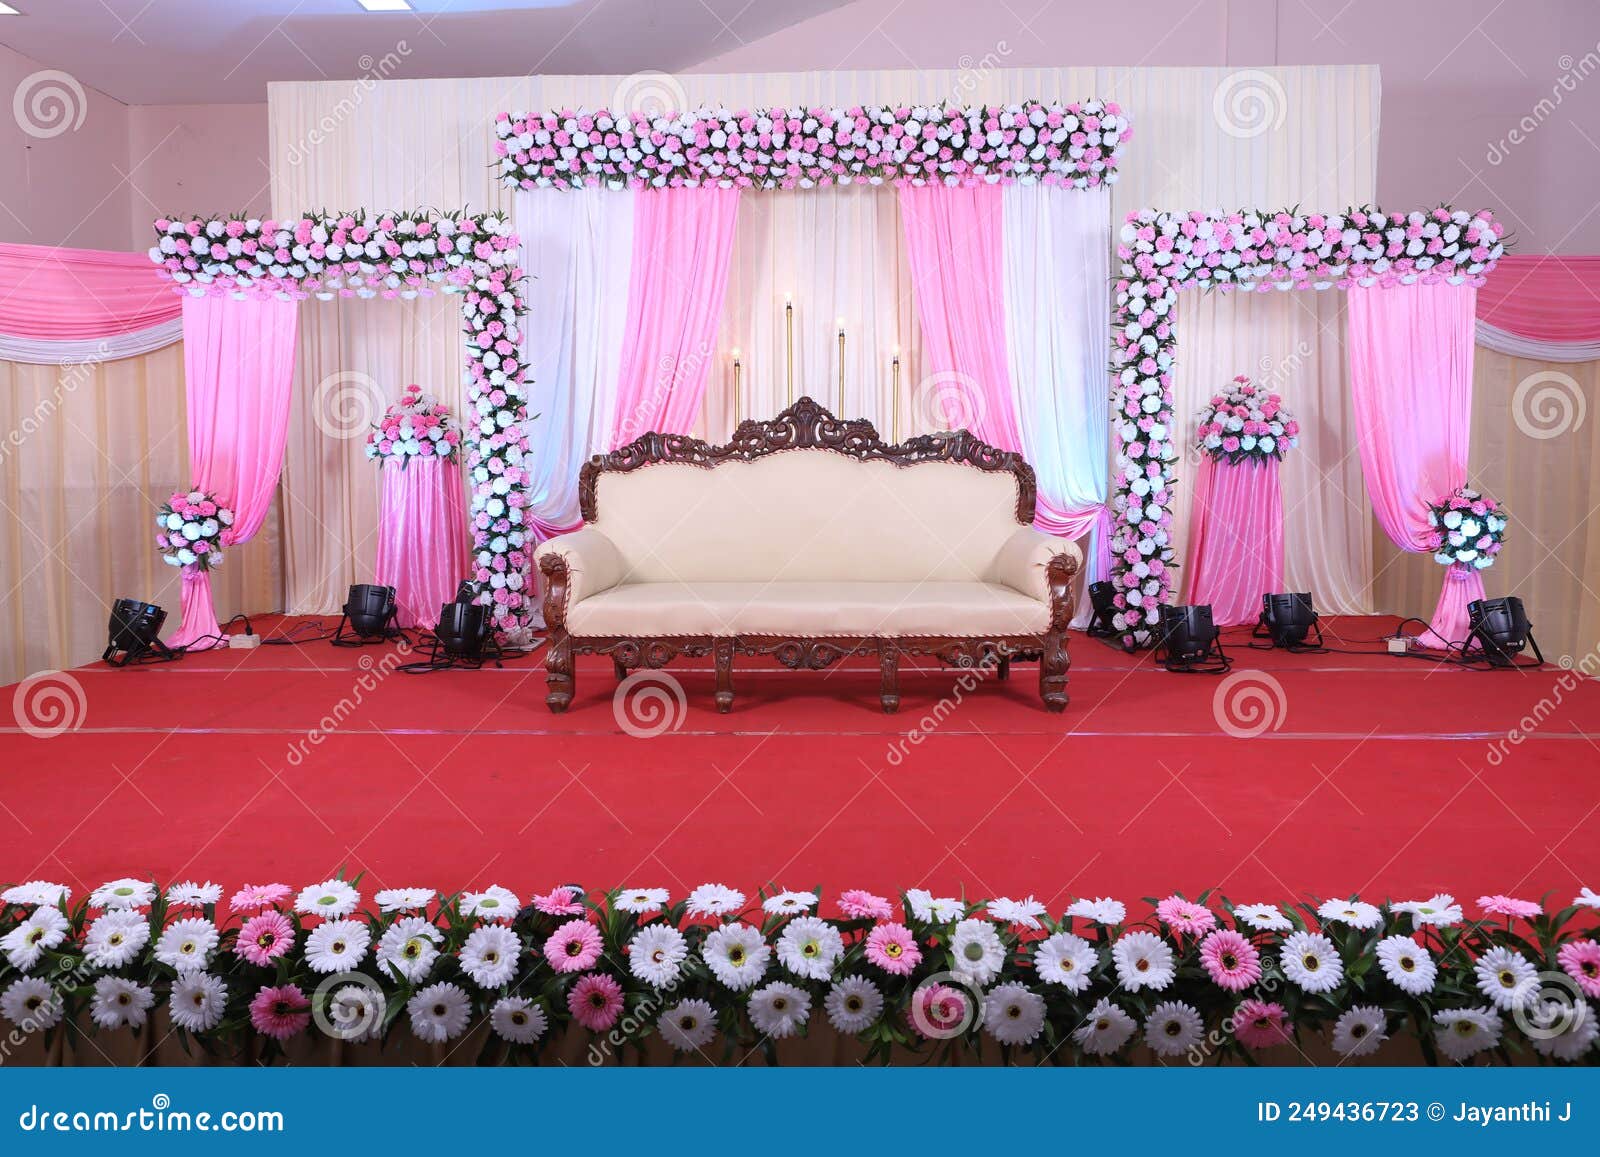 Image of Wedding Reception Stage With Flower Decoration-ZI295176-Picxy